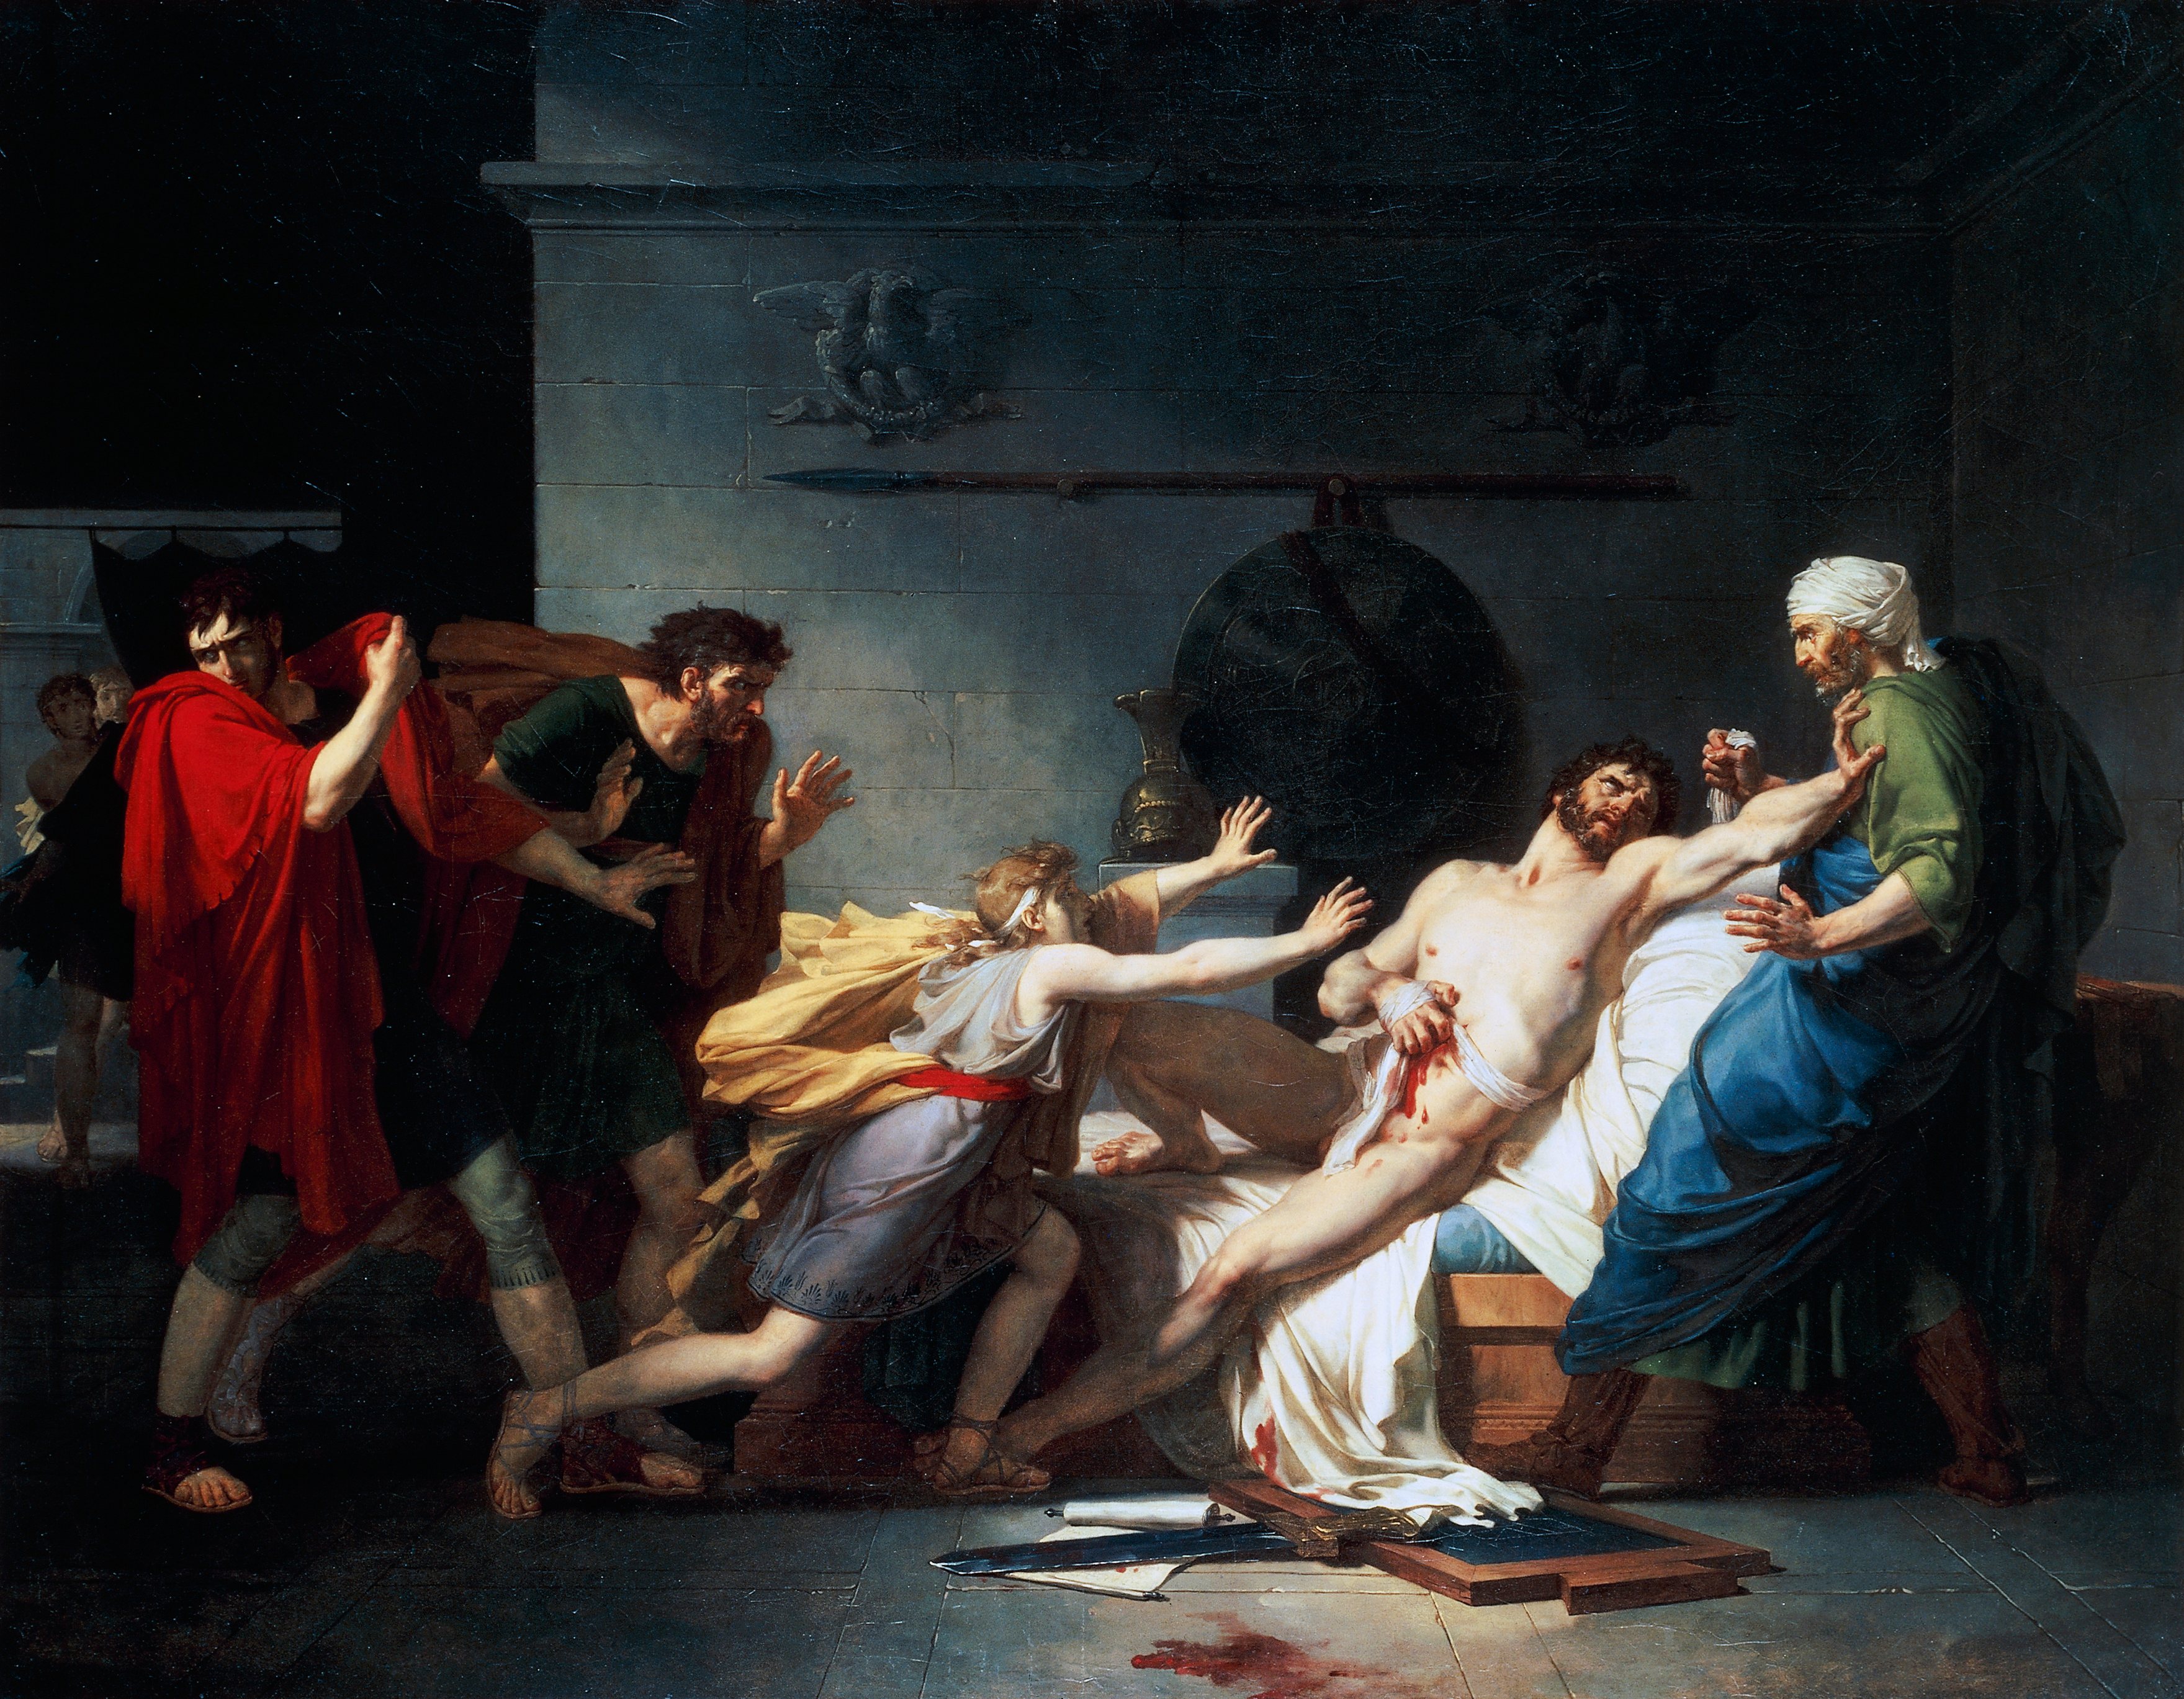 Death of Cato the Younger also known as Uticensis